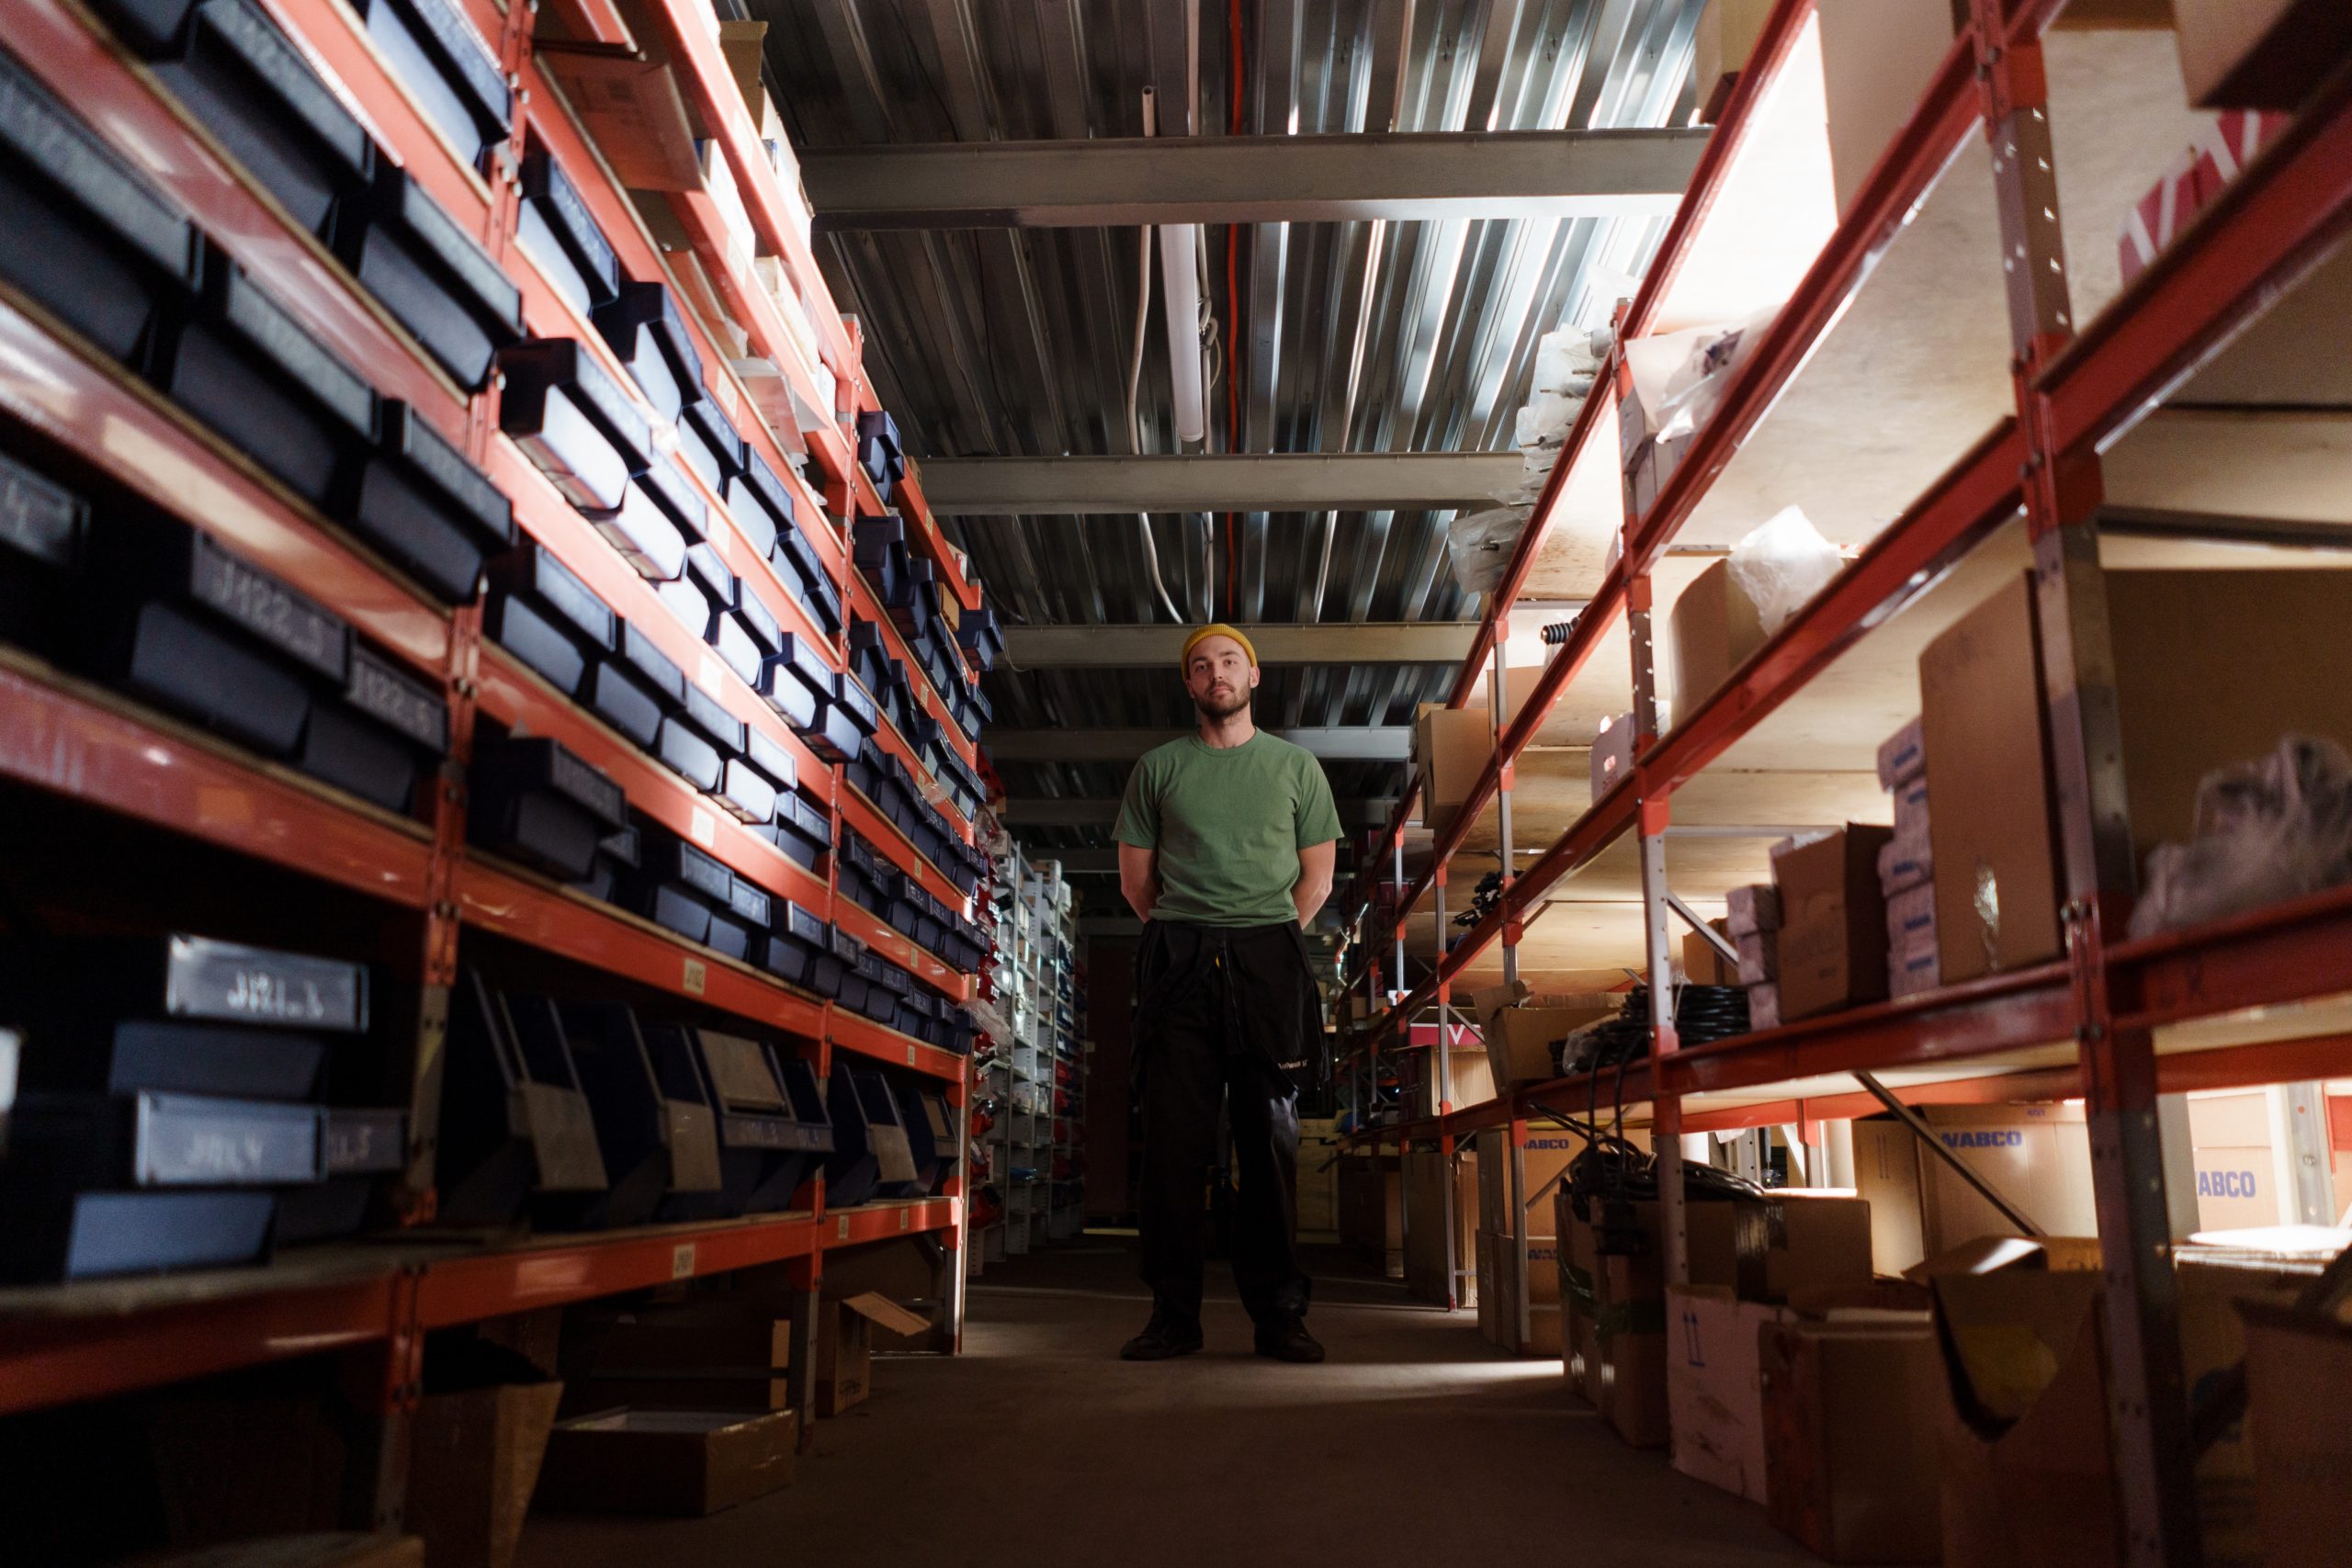 Supervisor overseeing inventory inside a warehouse